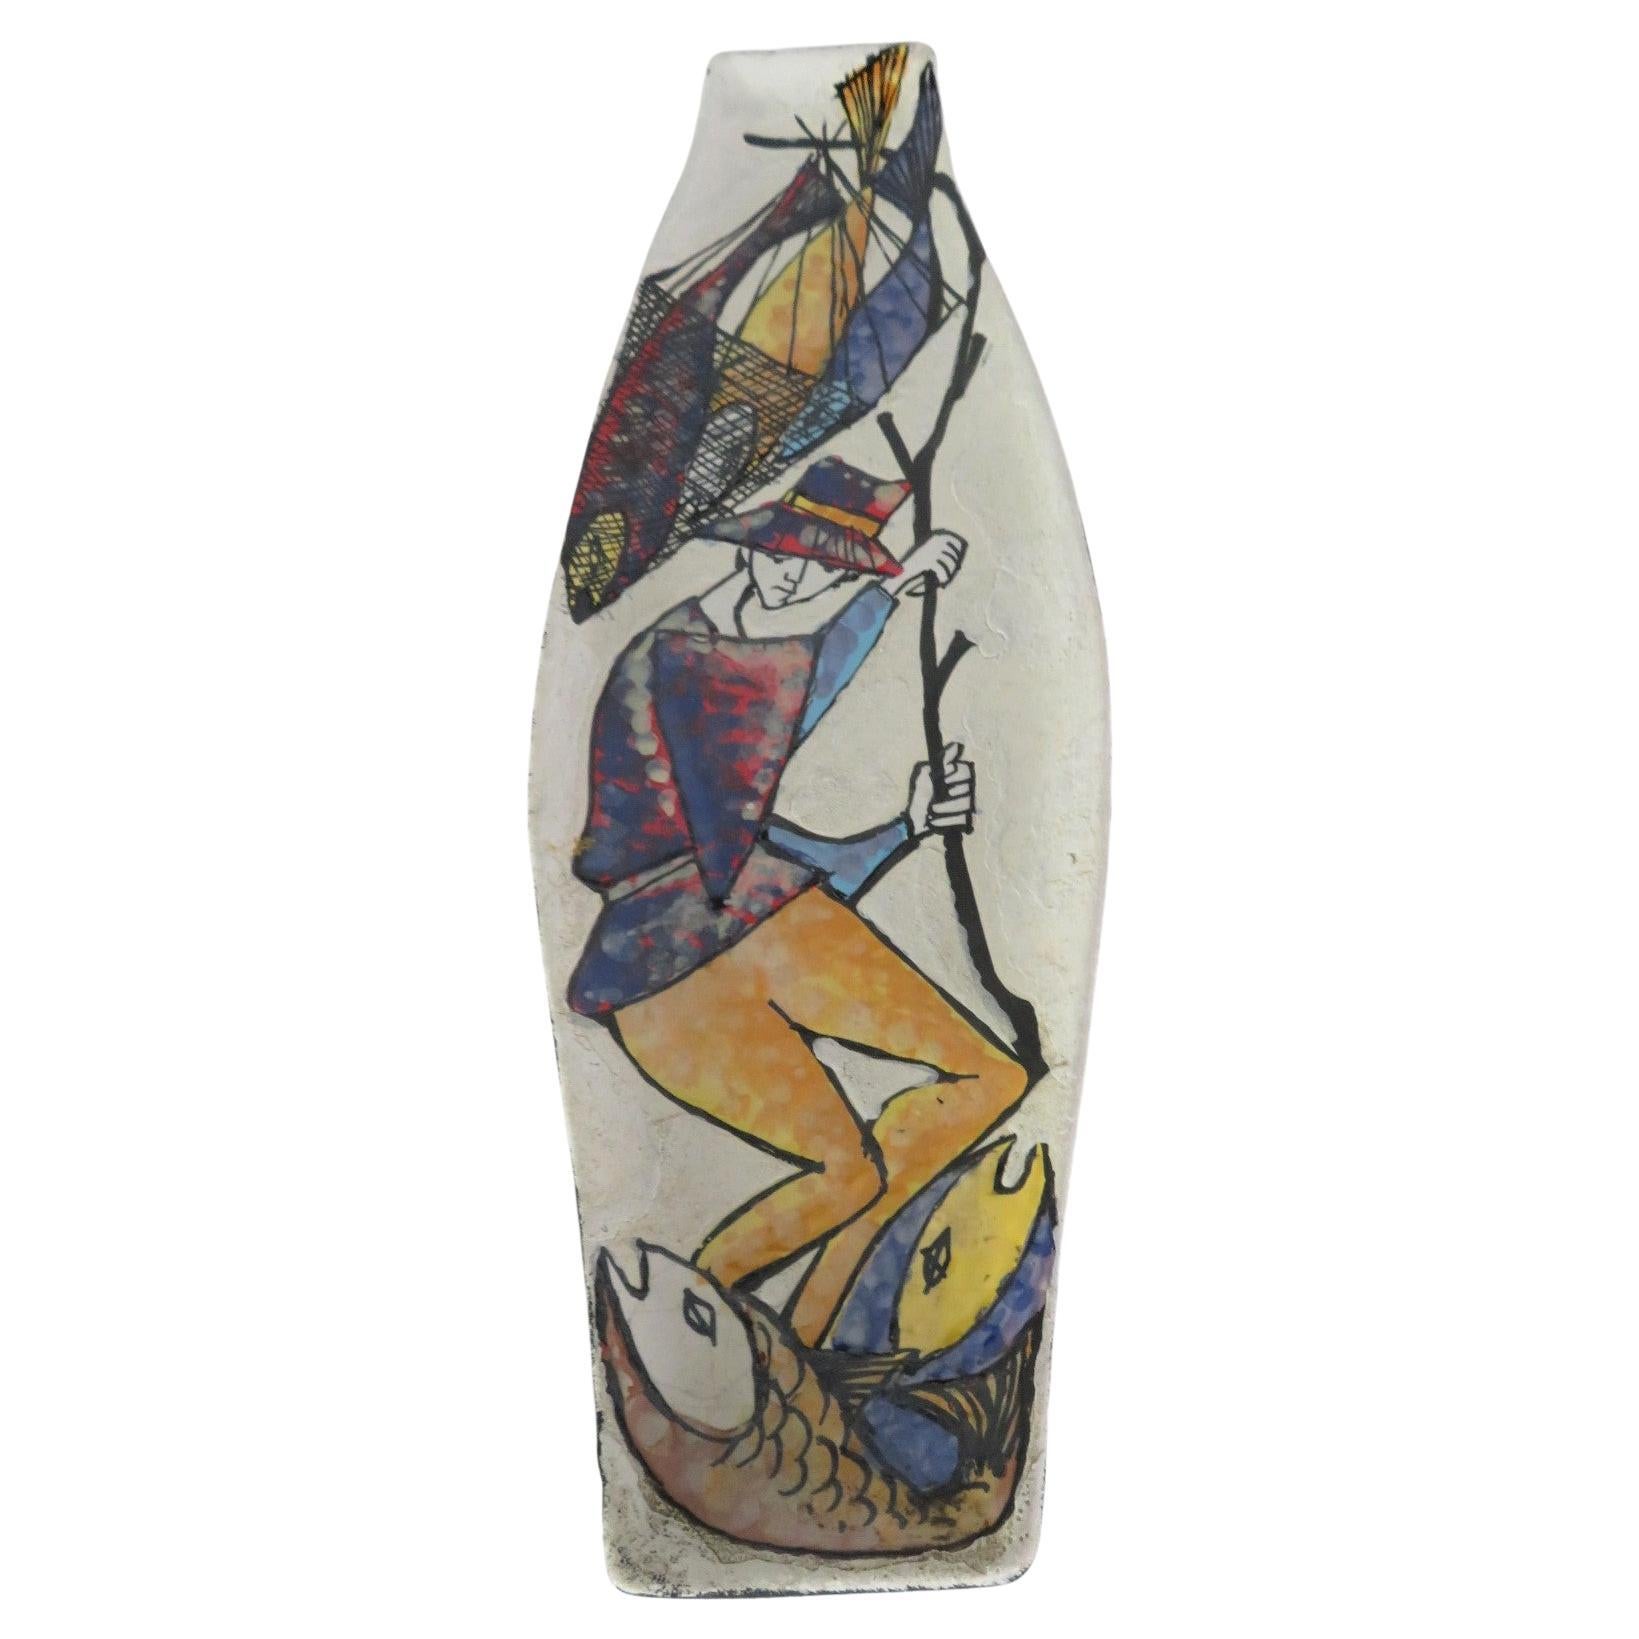 REDUCED FROM $300....Modernist depiction of a Fisherman and His Catch on this 1960s colorful Italian Ceramic Wall plaque.  A combination of glossy glaze decoration on a textured satin grayish background while the back is completely glazed flat